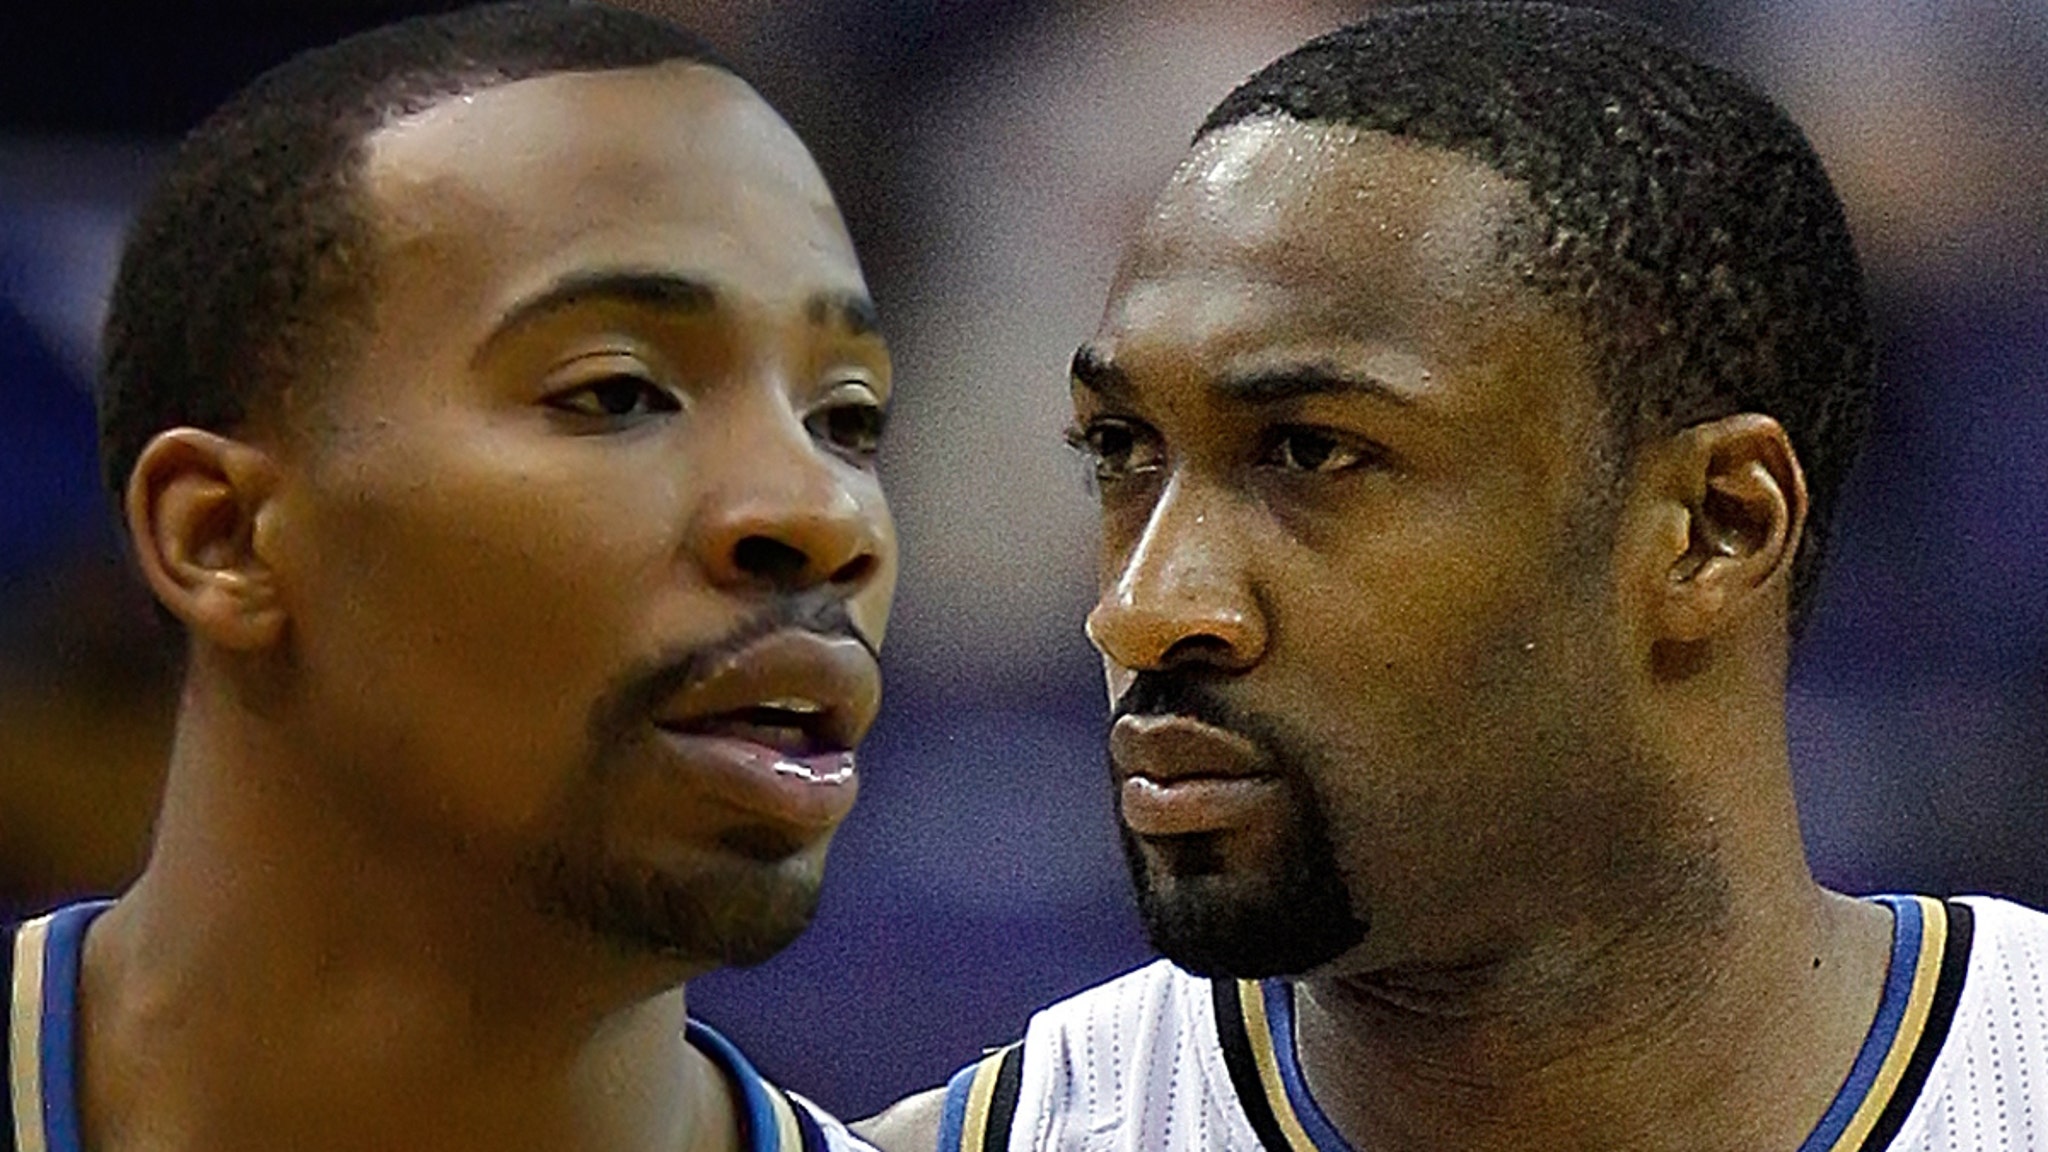 Gilbert Arenas says he’s cool with Javaris Crittenton, ‘Talk Once A Week’ in jail